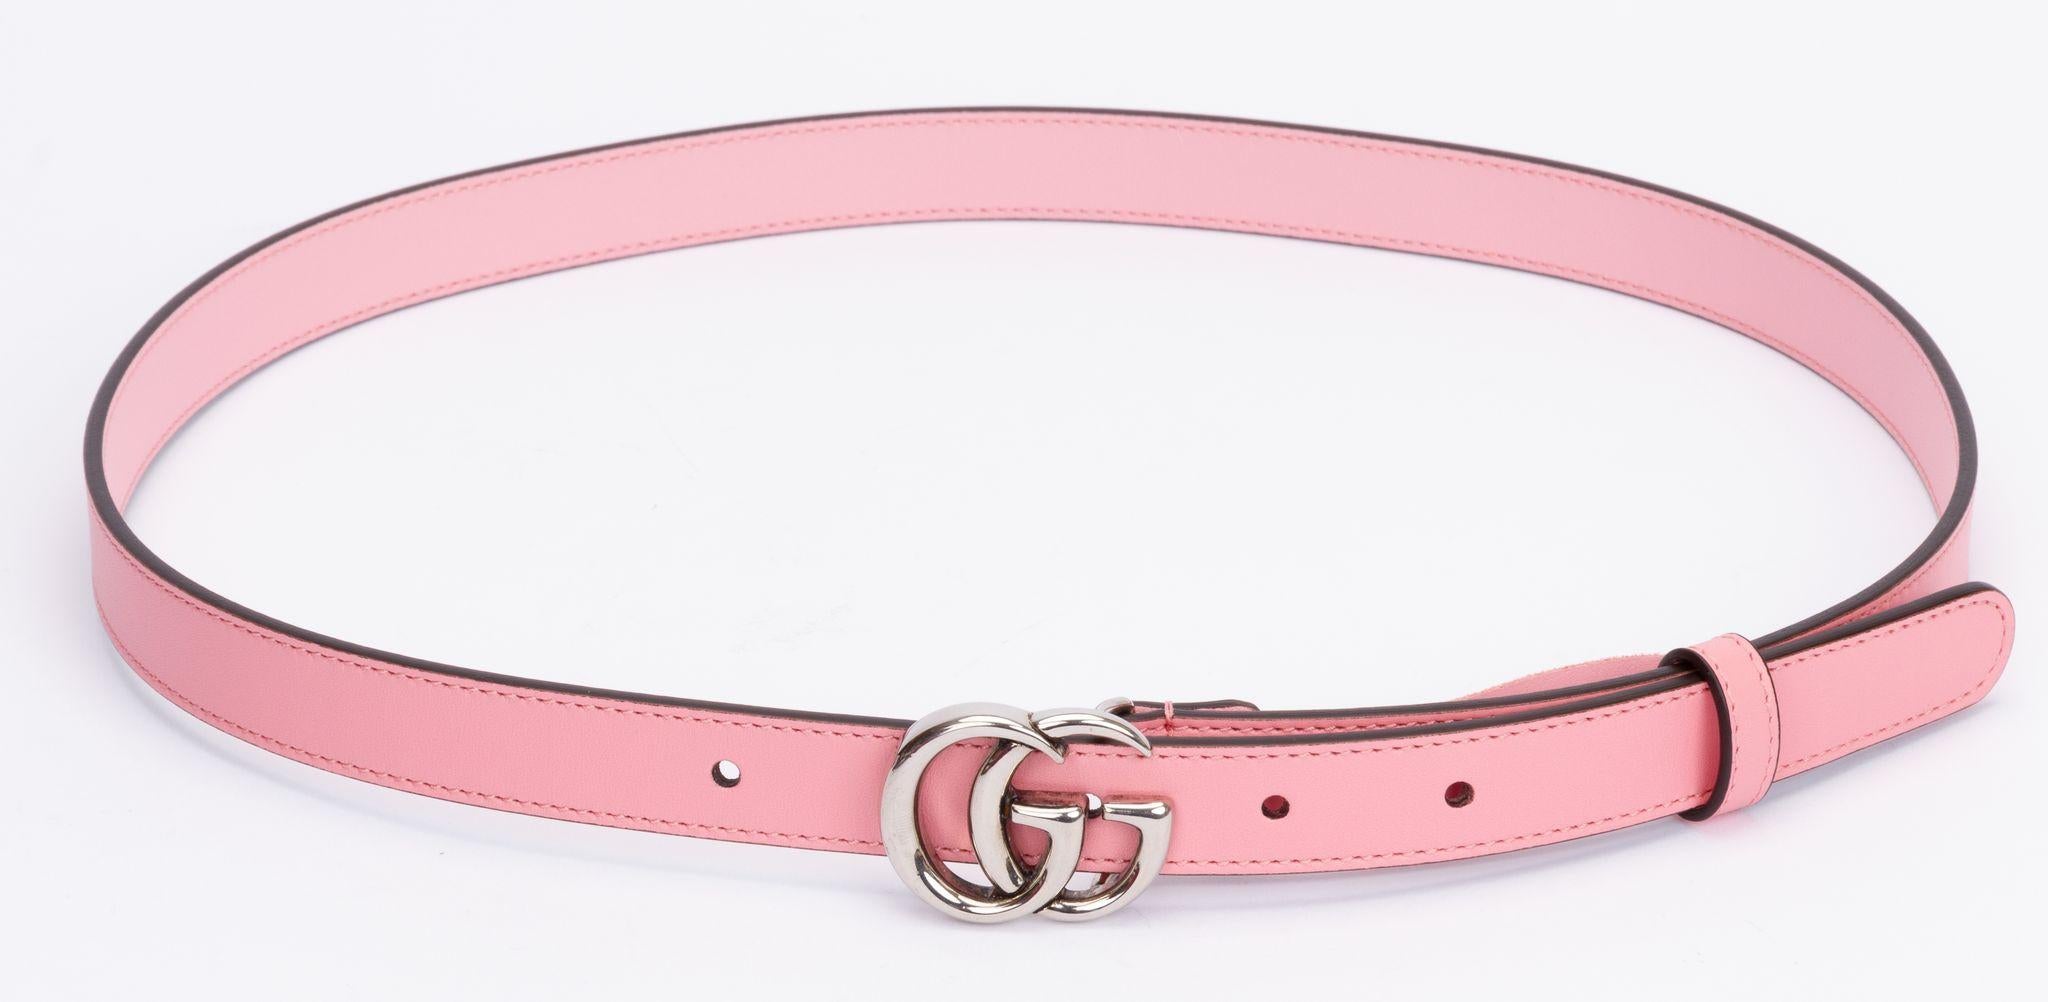 Gucci Belt in pink. This slim belt comes in a rose tone and the buckle is the GG logo in silver hardware. The piece is new and comes with the original dust cover.